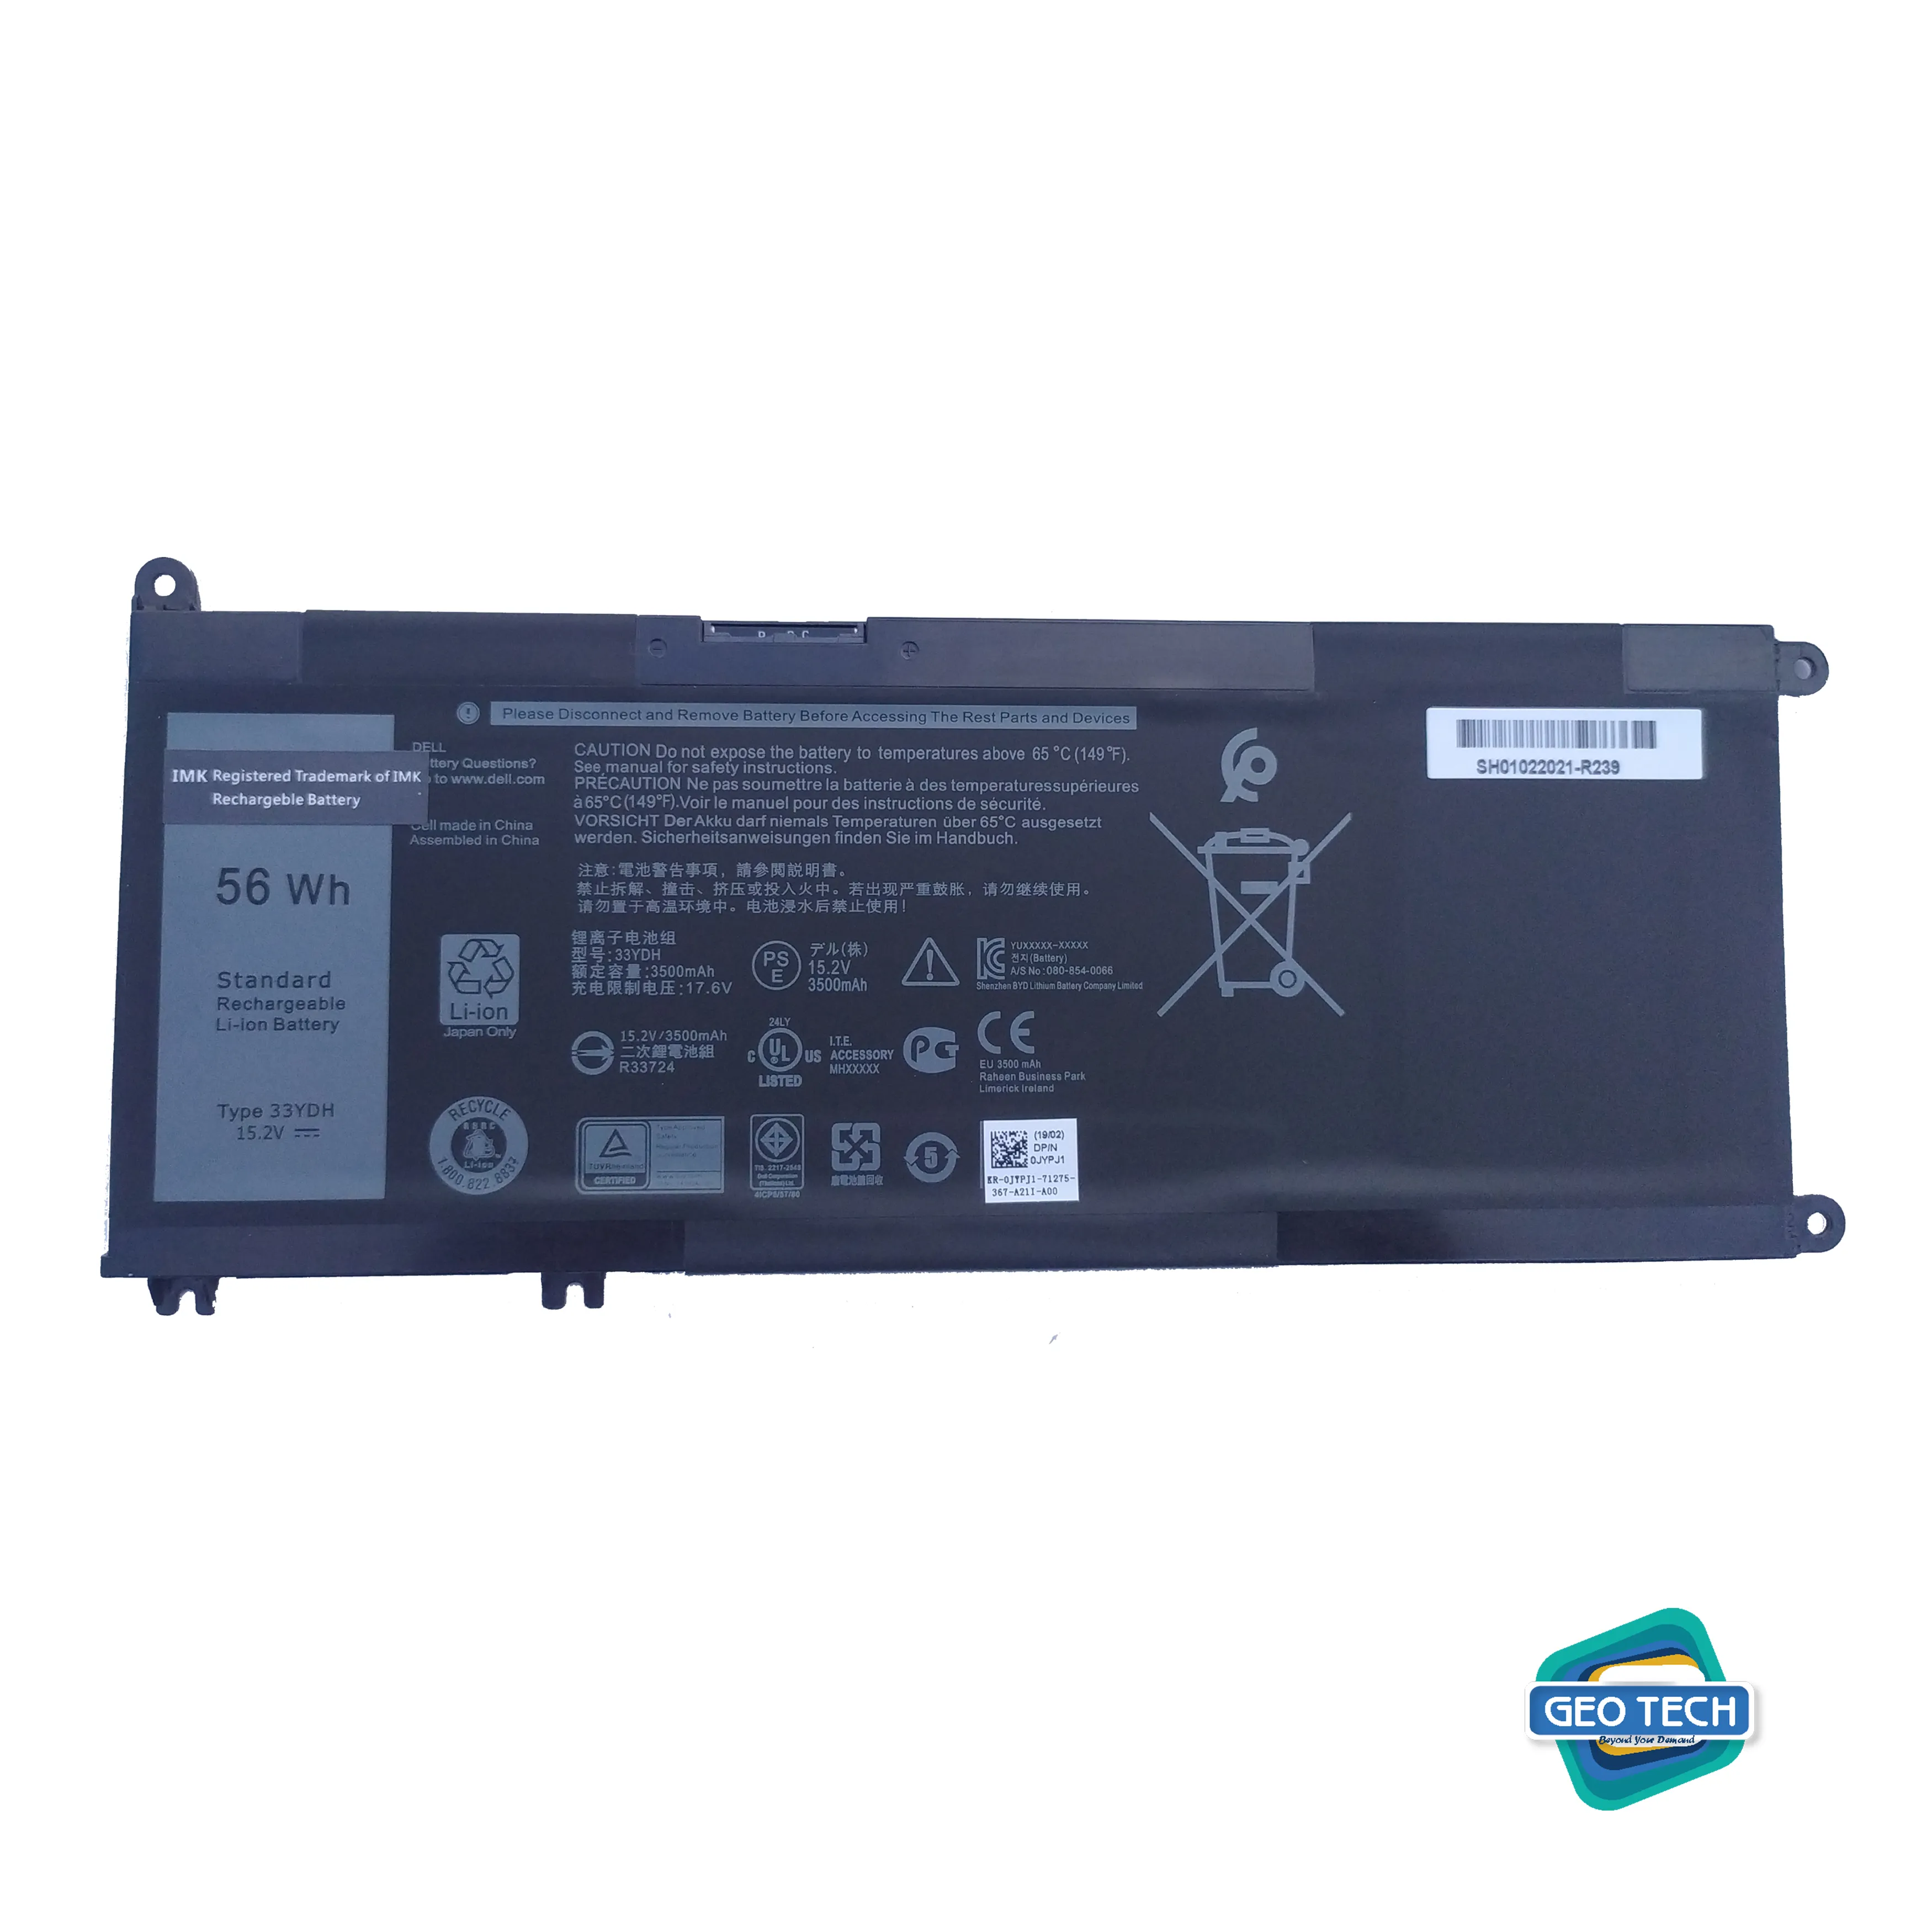 56WH 33YDH Laptop Battery for Dell Inspiron 17 7000 7778 7779 7786 7773 15 7577 G3 3579 3779 G5 5587 G7 7588 Latitude 13 3380 14 3490 15 3590 3580 PVHT1 P30E 81PF3 081PF3 - 12 Months Warranty